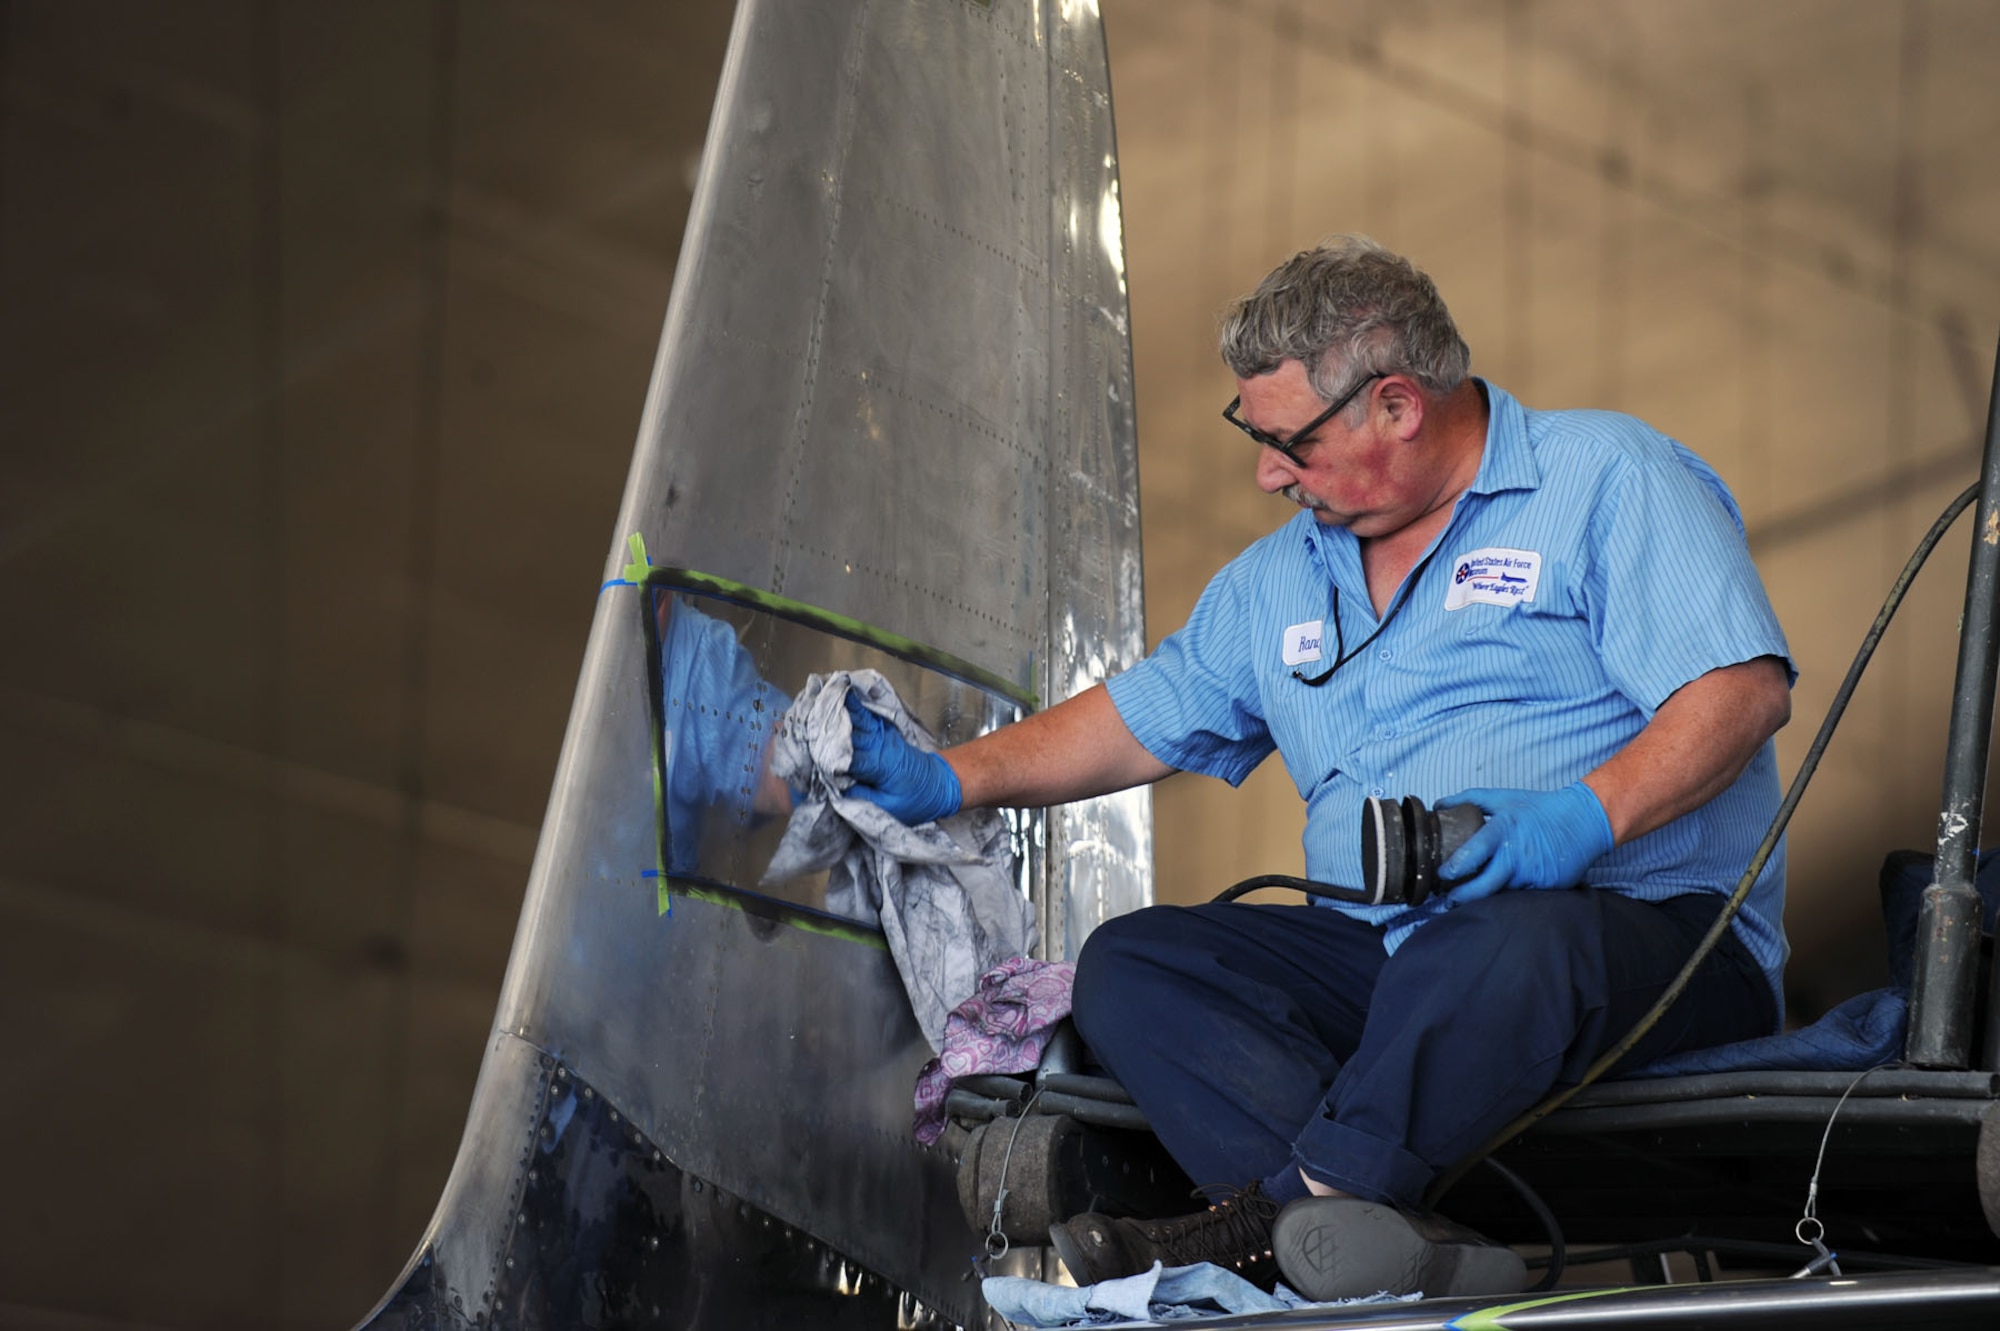 DAYTON, Ohio (04/2010) -- A restoration specialist works on the F-84 in the Restoration Hangar at the National Museum of the U.S. Air Force. (U.S. Air Force photo/Master Sgt. William Greer)